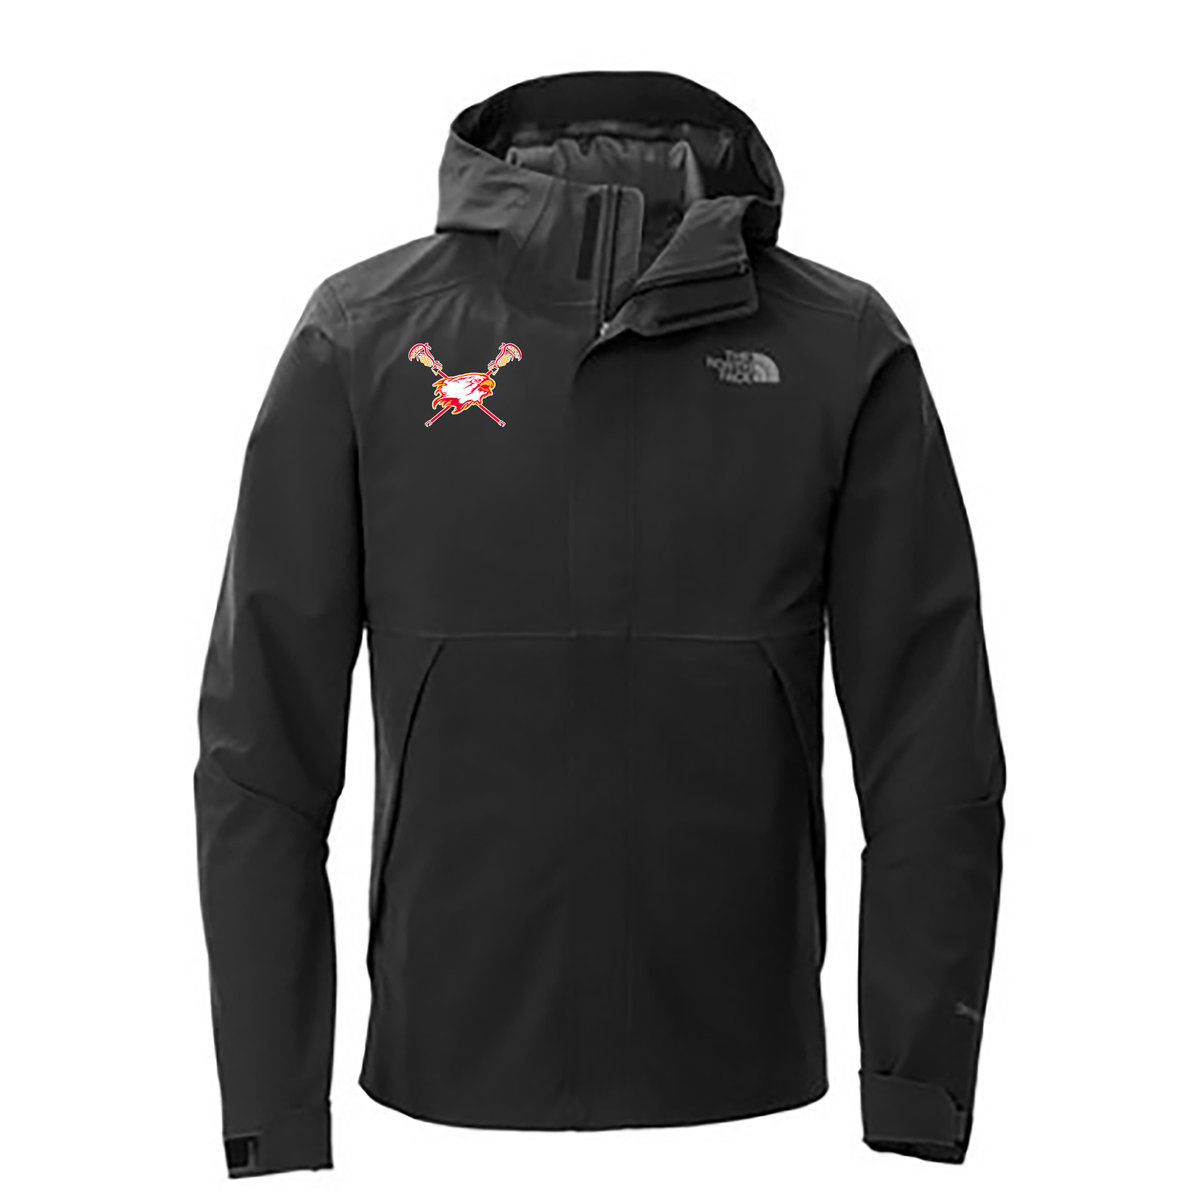 Falcons Lacrosse Club The North Face DryVent Jacket